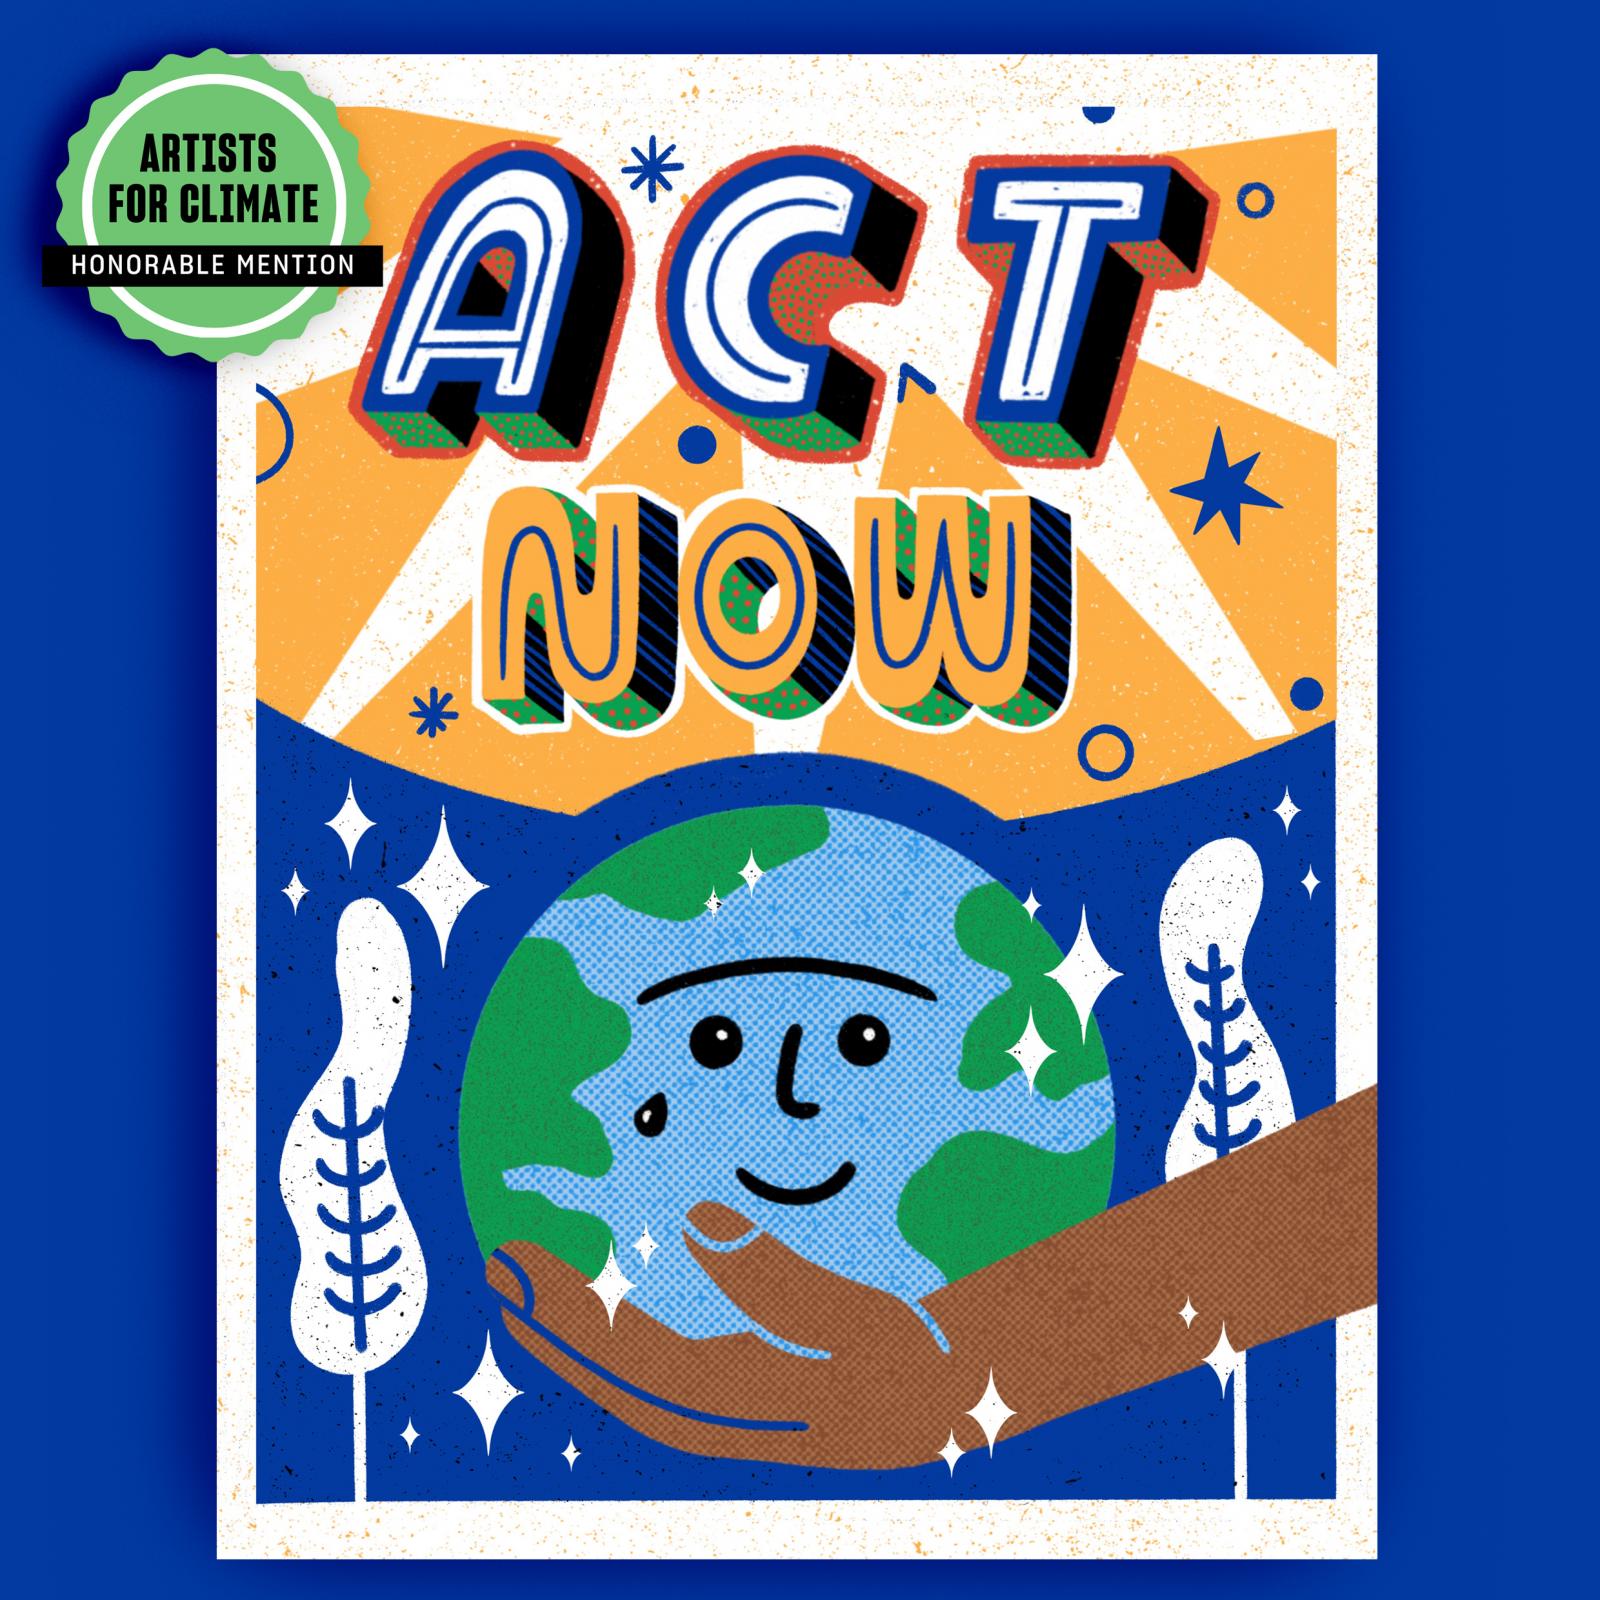 Artwork selected as a Honorable Mention by TED Countdown and Fine Acts. This artwork is part of Artists for Climate - a unique collection of open-license visuals that inspire climate action. A creative collaboration between Fine Acts and TED Countdown. Learn more at ArtistsForClimate.org

Learn more, download and use this artwork:
https://thegreats.co/artworks/act-now-for-our-planet